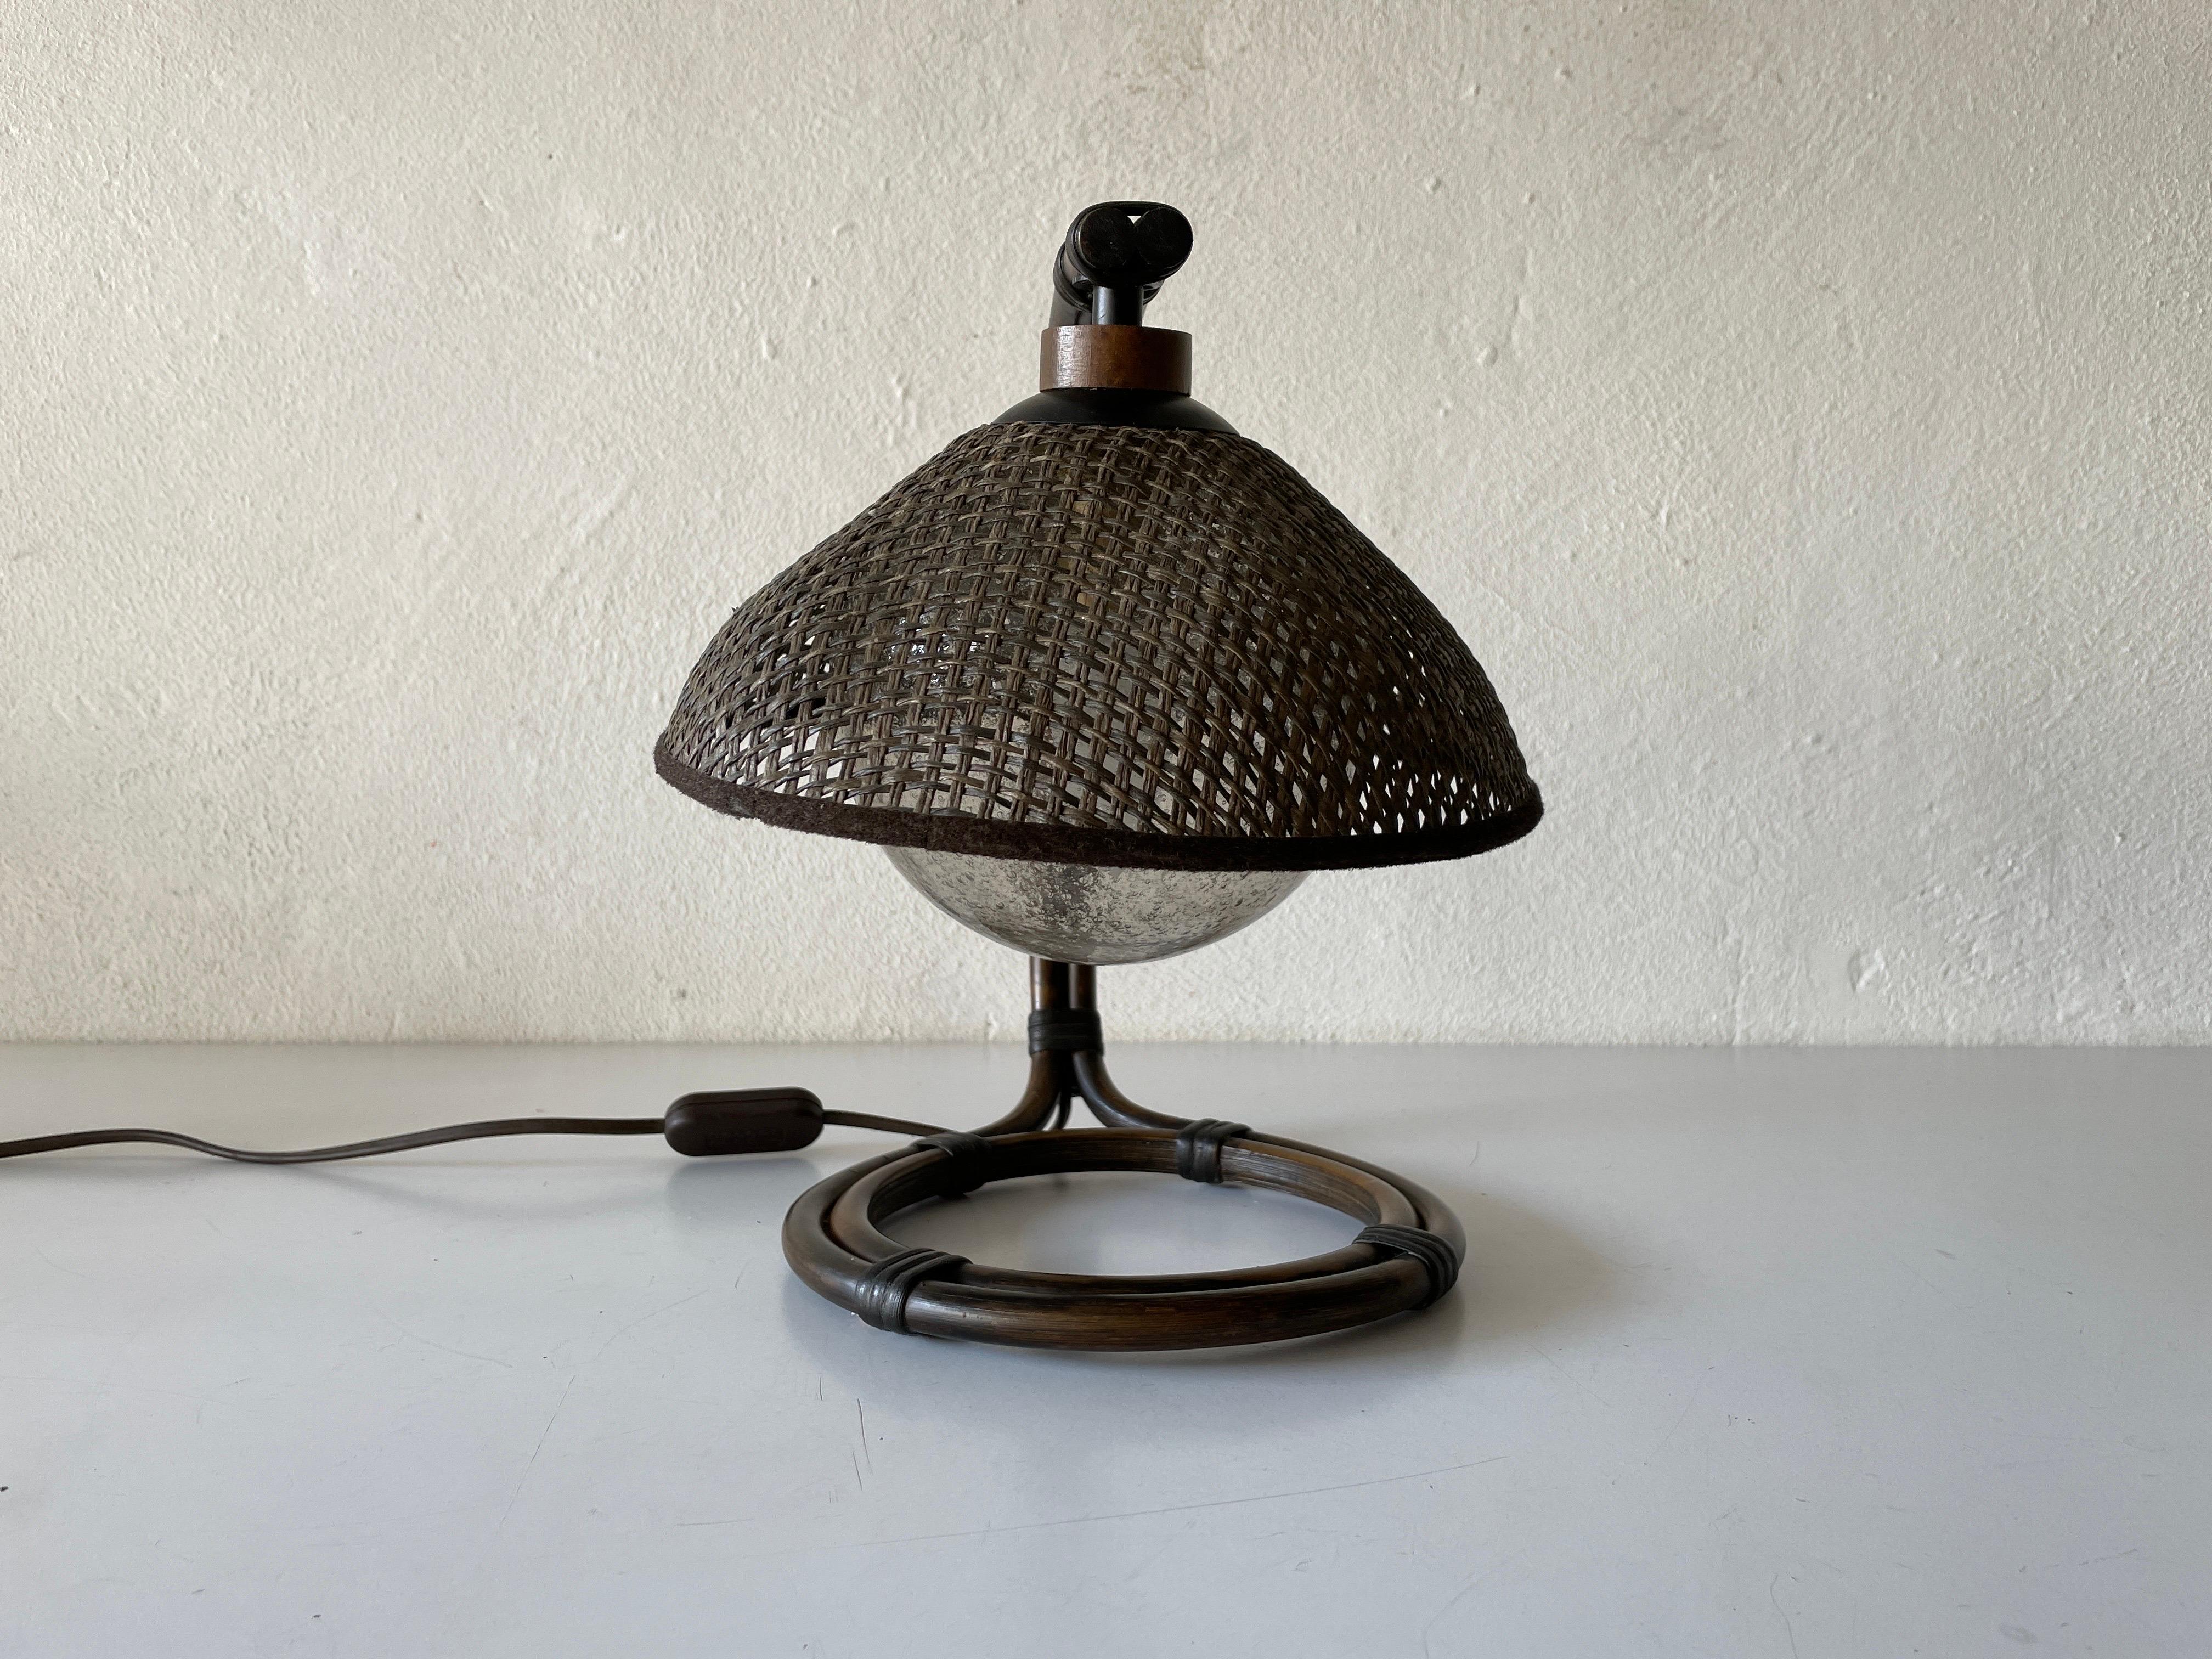 Rare Bamboo & Wicker Bedside Lamp with Air Bubble Glass by Temde, 1960s, Switzerland

Lampshade is in good condition and very clean. 
This lamp works with E27 light bulb
Wired and suitable to use with 220V and 110V for all